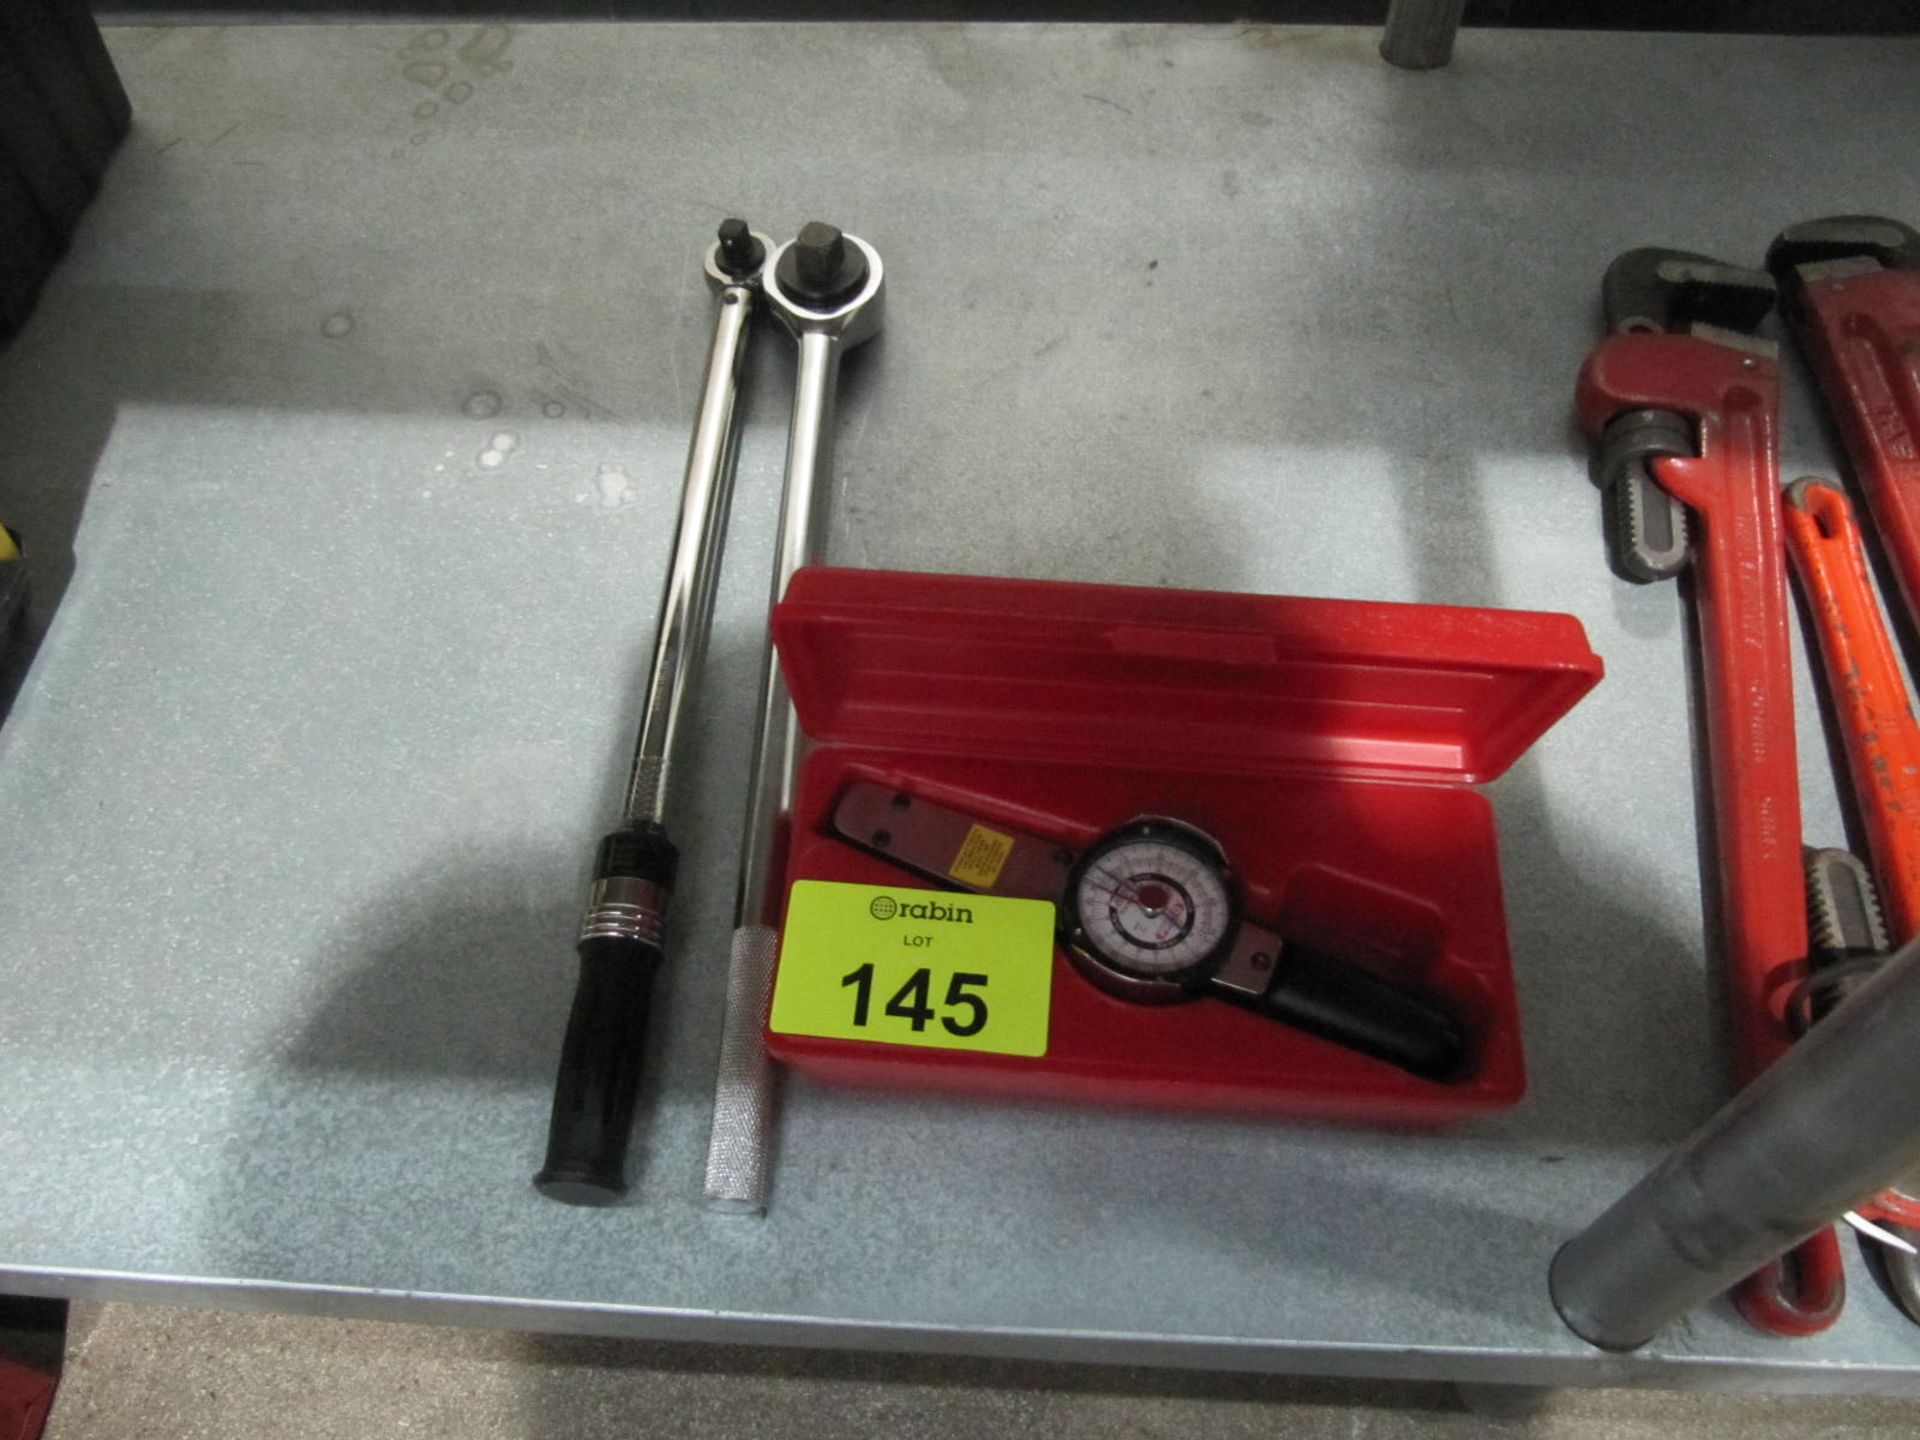 [Lot] Proto torque wrench, model 49859A, Proto model J6169F dual torque wrench and 18" breaker bar